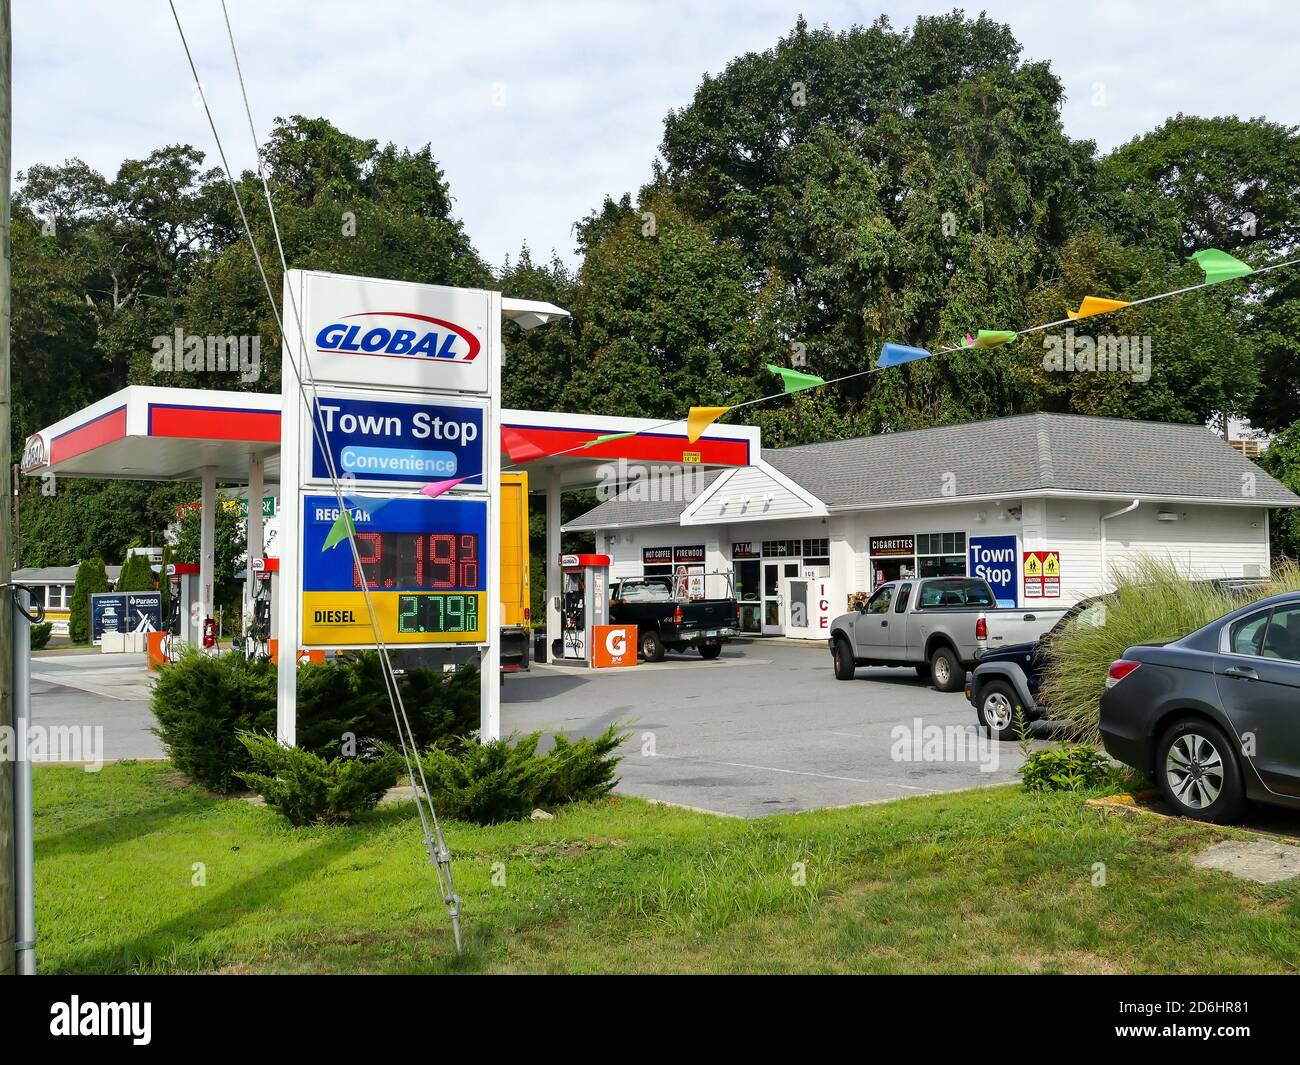 NORWALK, CT, USA-AUGUST 15, 2020: Global local gas station in Post Road 1 near exit 14 on I-95 Stock Photo